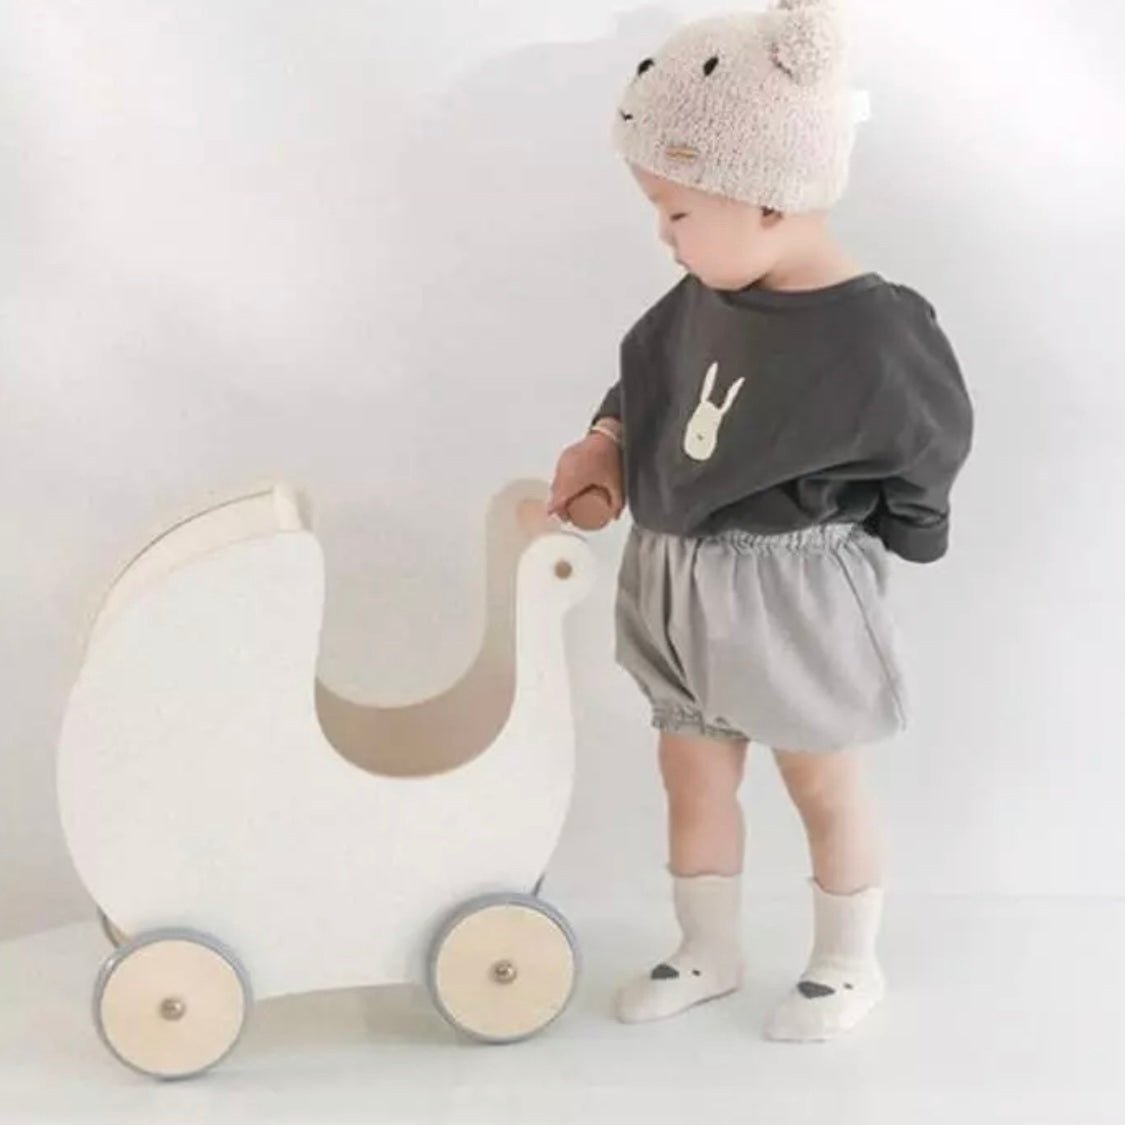 Daily Socken find Stylish Fashion for Little People- at Little Foxx Concept Store